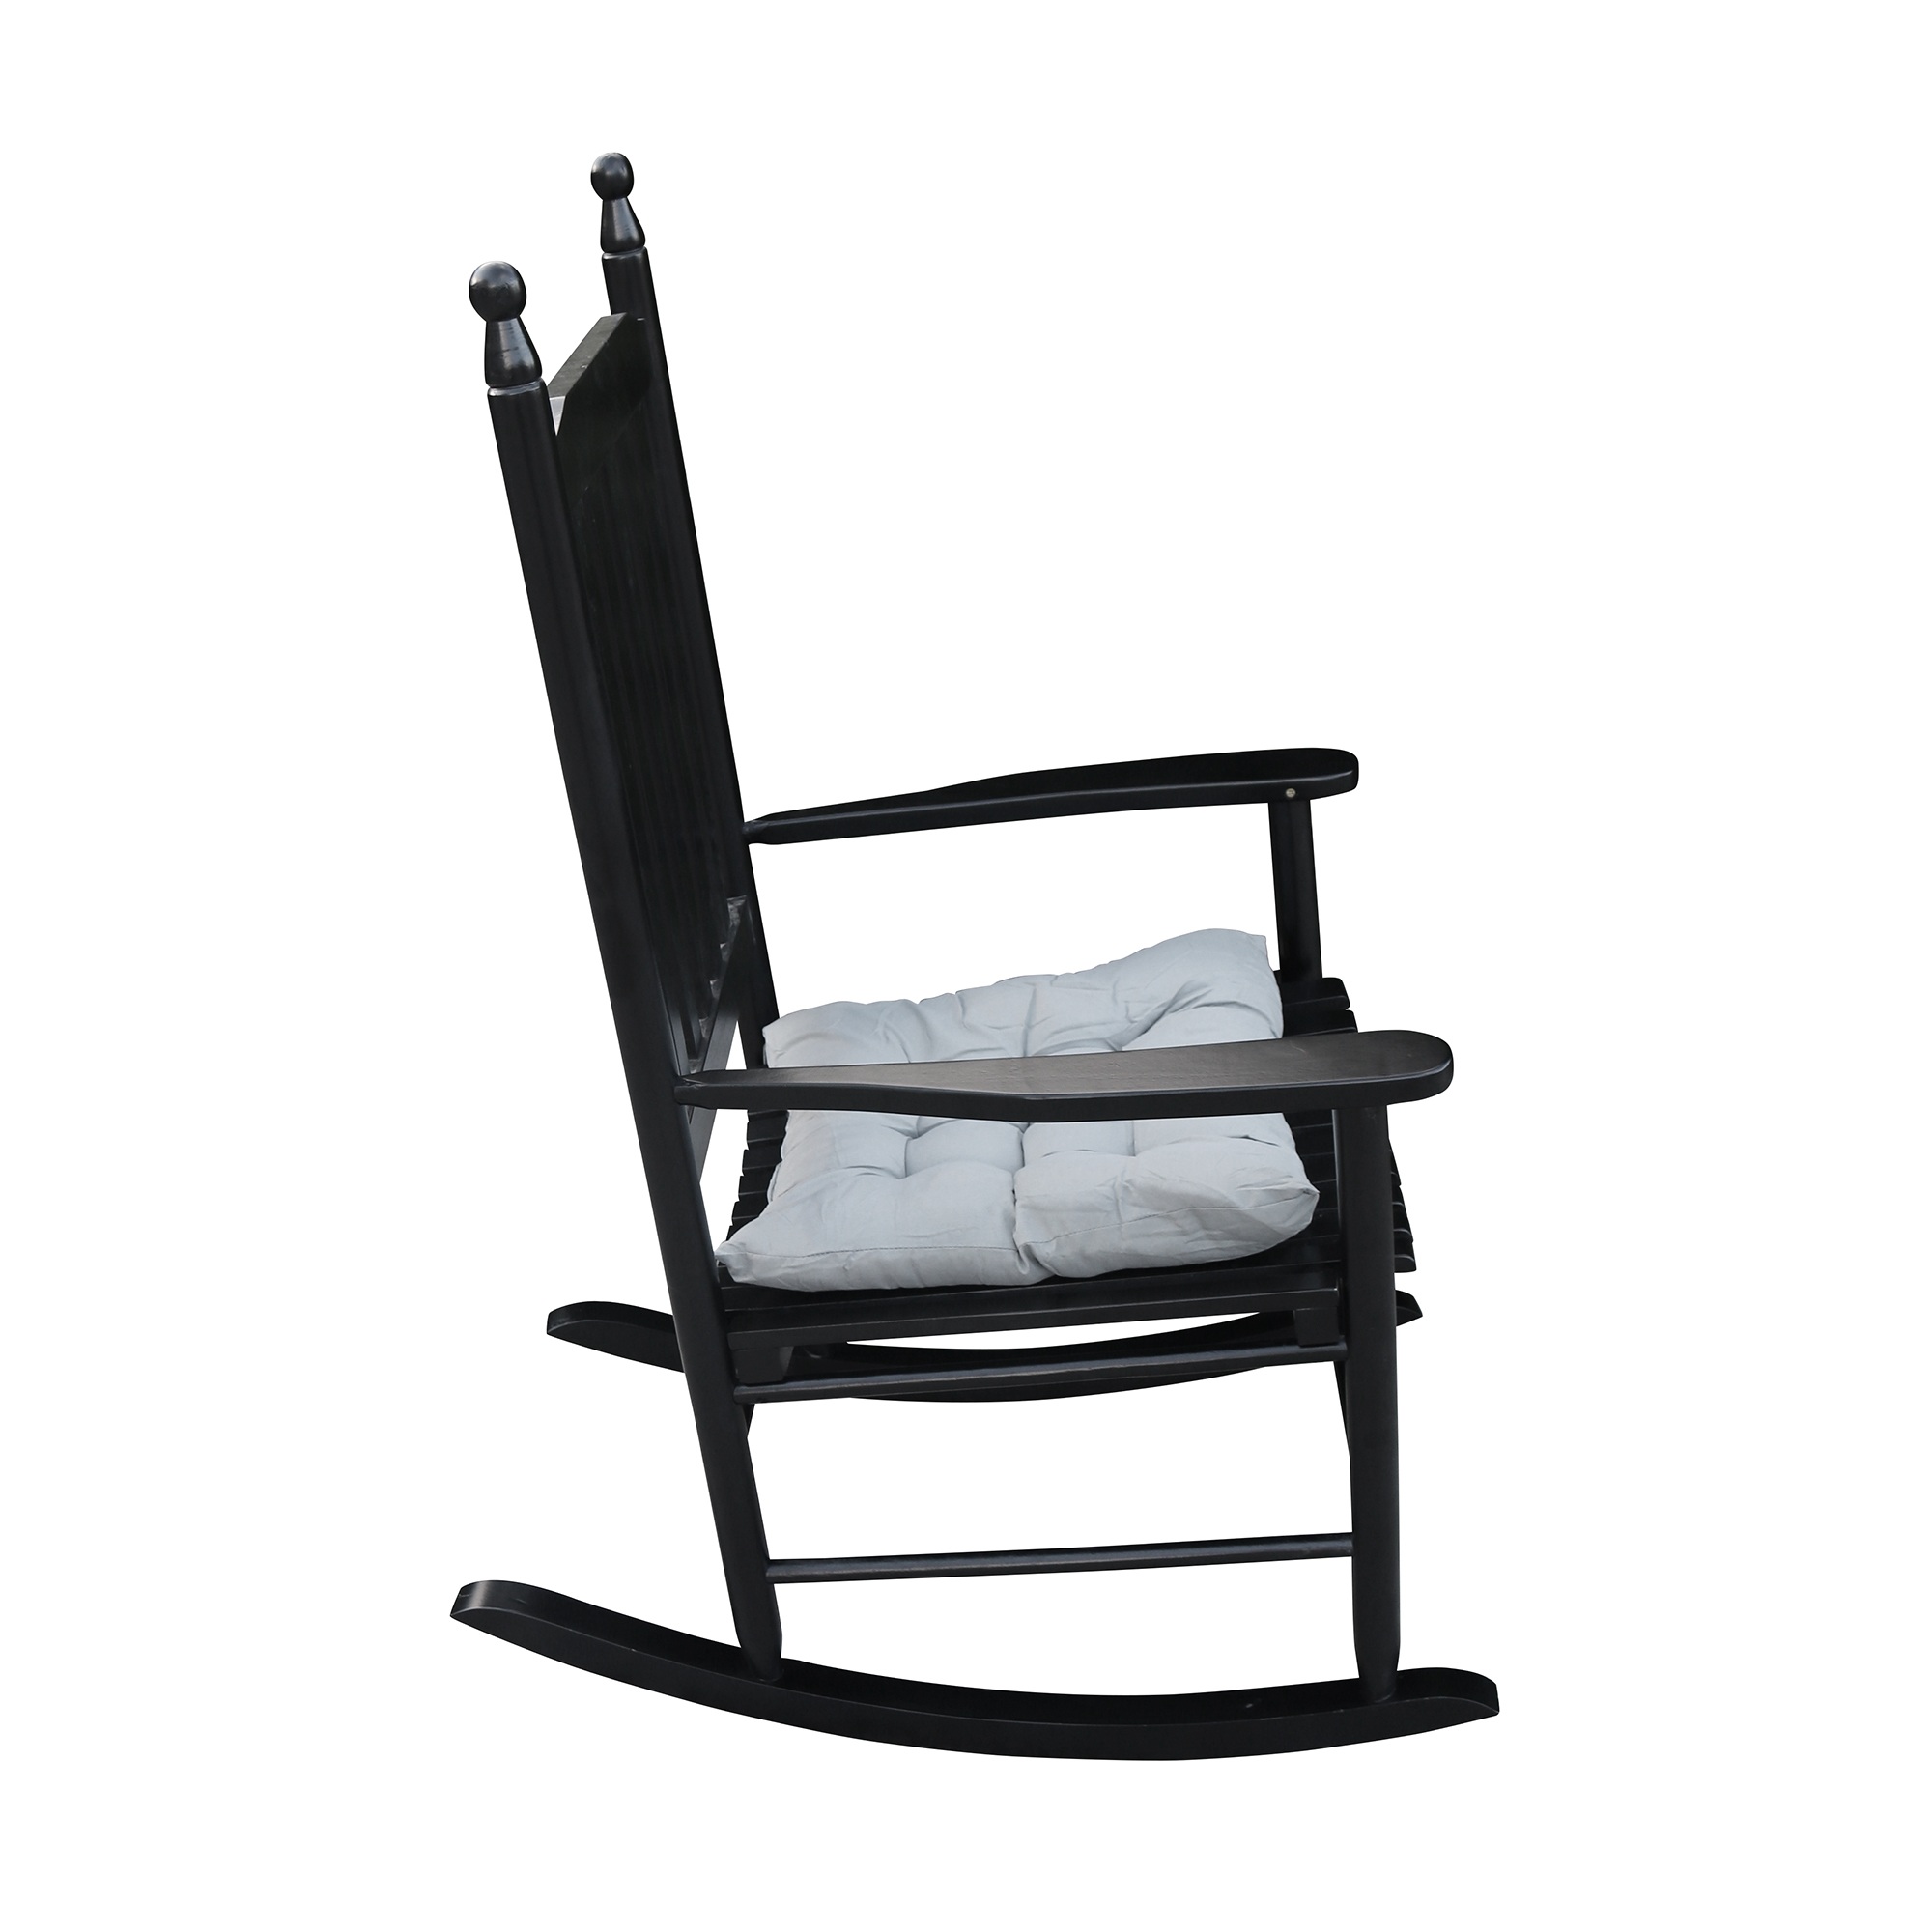 Rocking Chair for Outdoor, Wooden Patio Porch Rocker Chair with Back Support, Ergonomic Wooden Rocking Chair for Patio Porch Backyard, Rocking Bistro Chair Patio Chairs, Max 280lbs, Black, A1592 - image 3 of 7